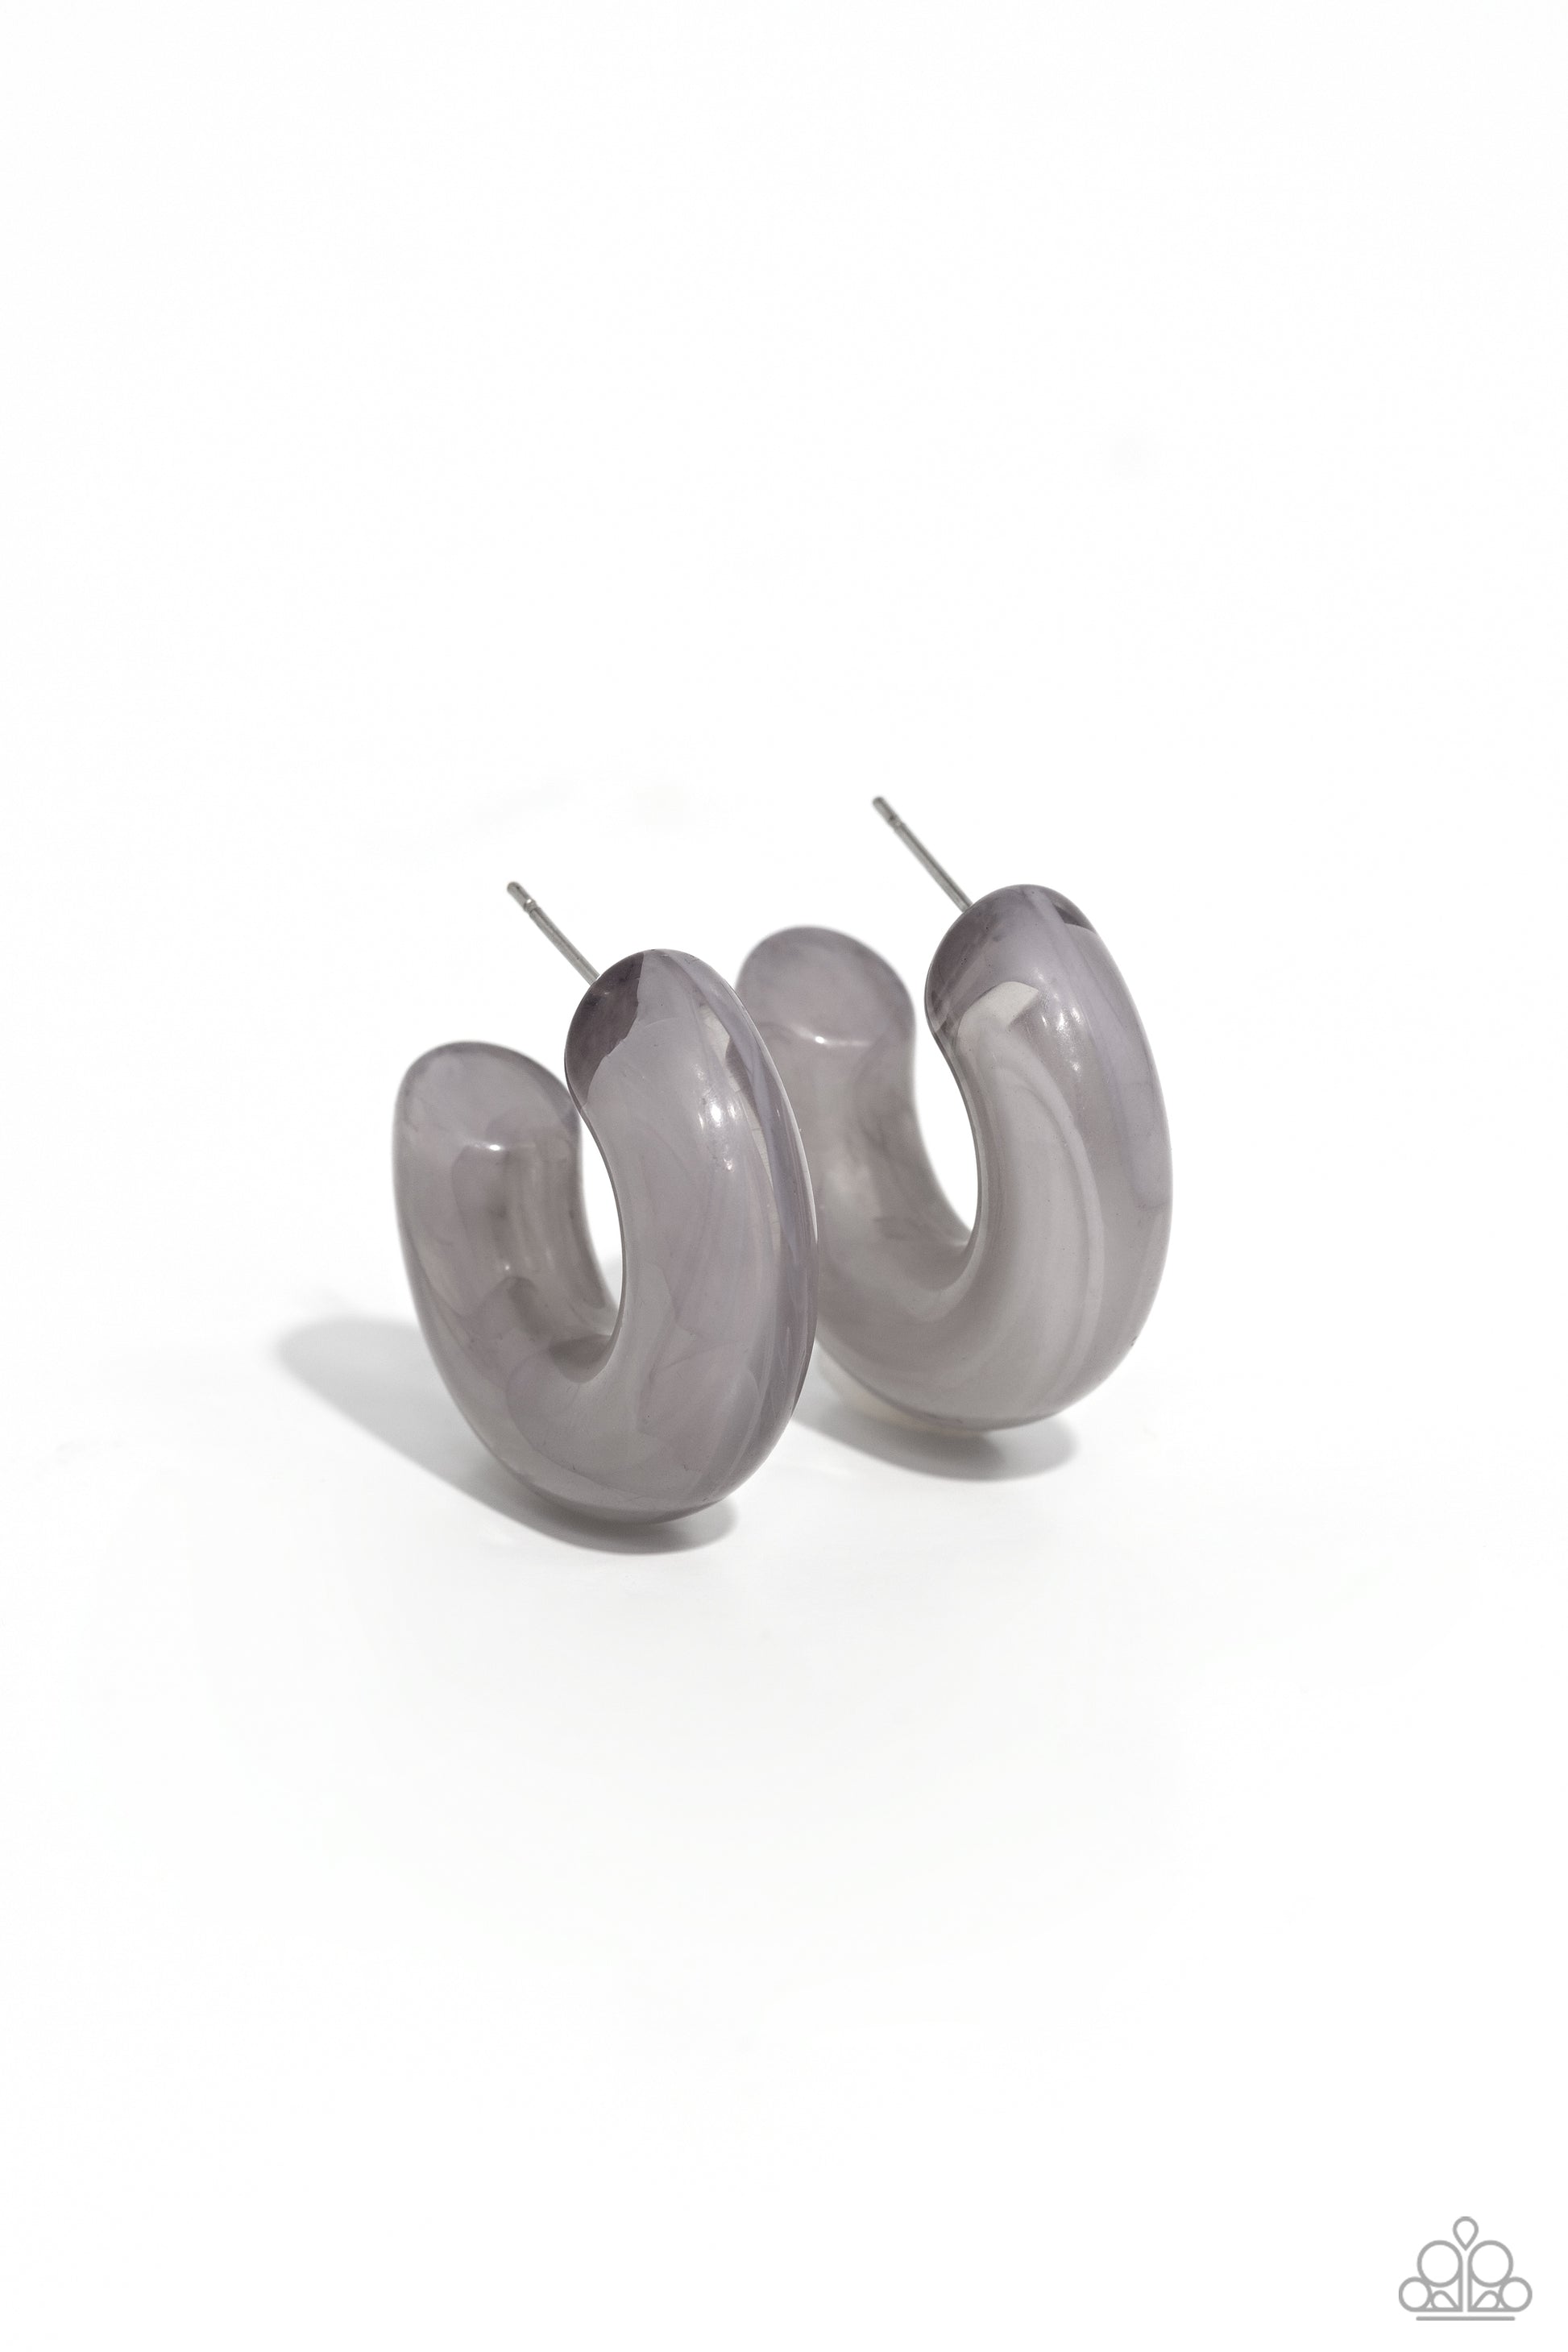 Paparazzi Accessories - Acrylic Acclaim - Silver Hoop Earrings featuring a milky accent, thick gray acrylic frames snugly loop and curl just below the ear for a fashionable finish. Earring attaches to a standard post fitting. Hoop measures approximately 1" in diameter.  Sold as one pair of hoop earrings.